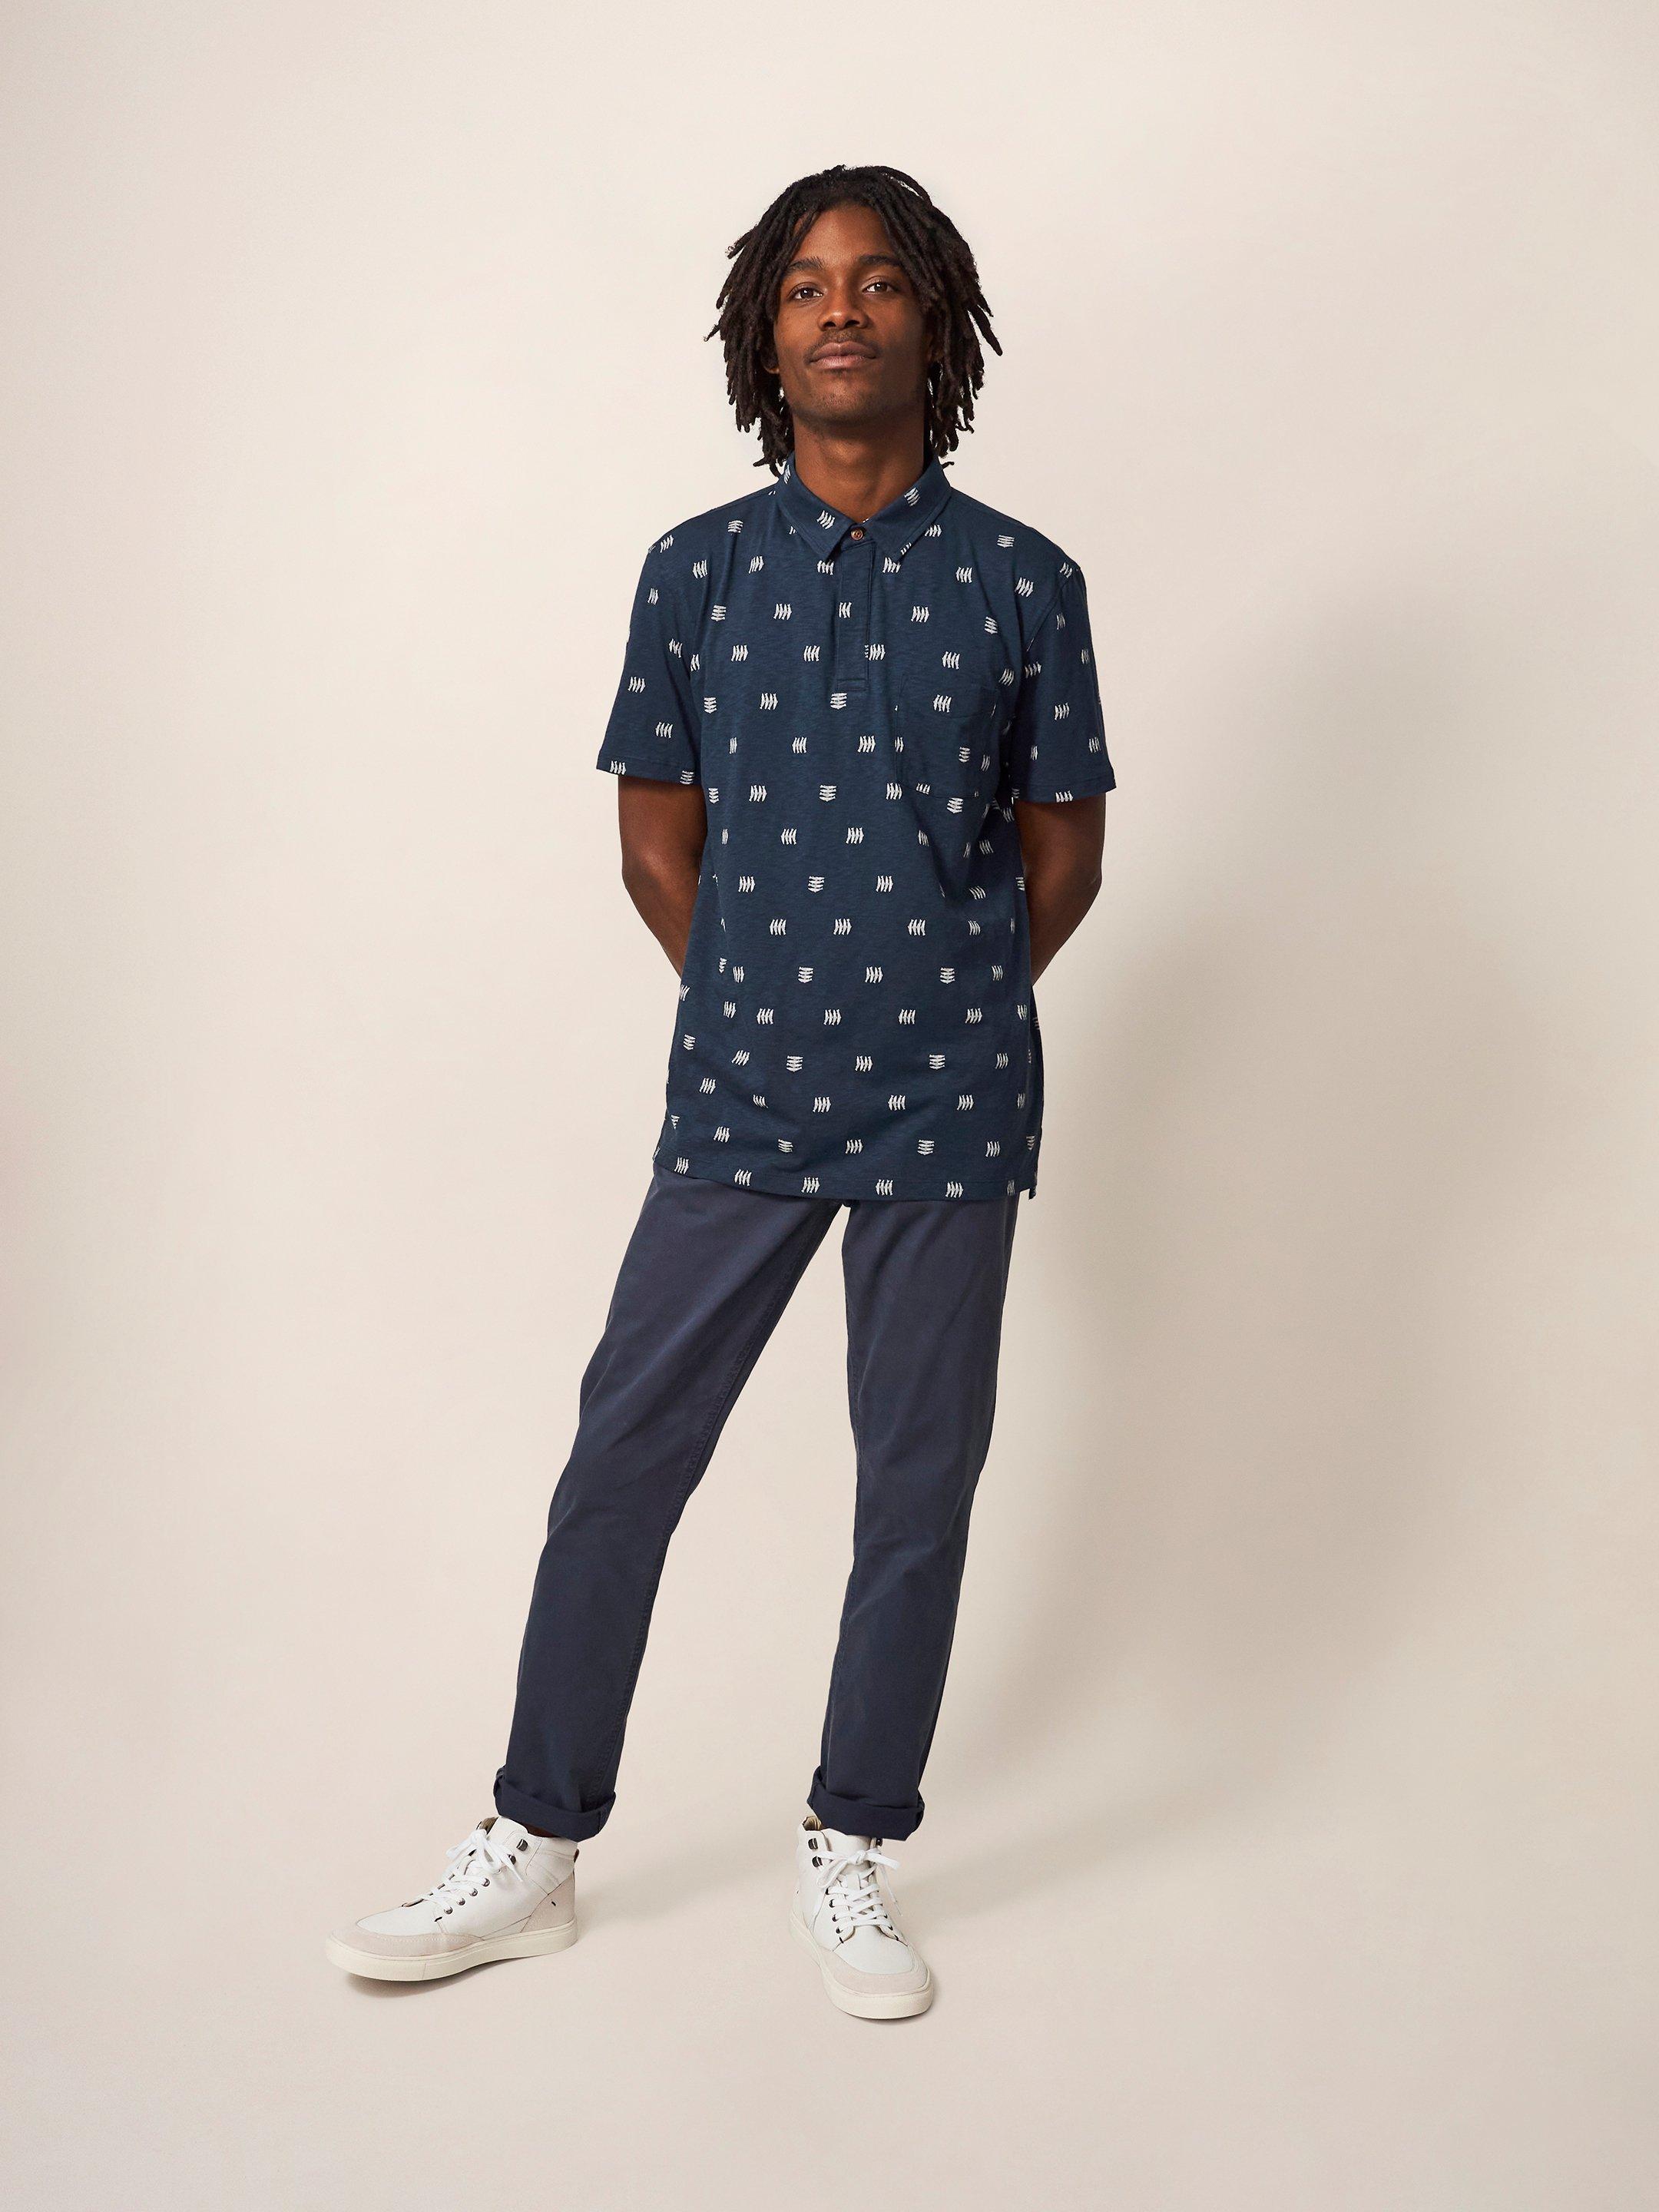 Sardine Printed SS Polo in NAVY - MODEL FRONT